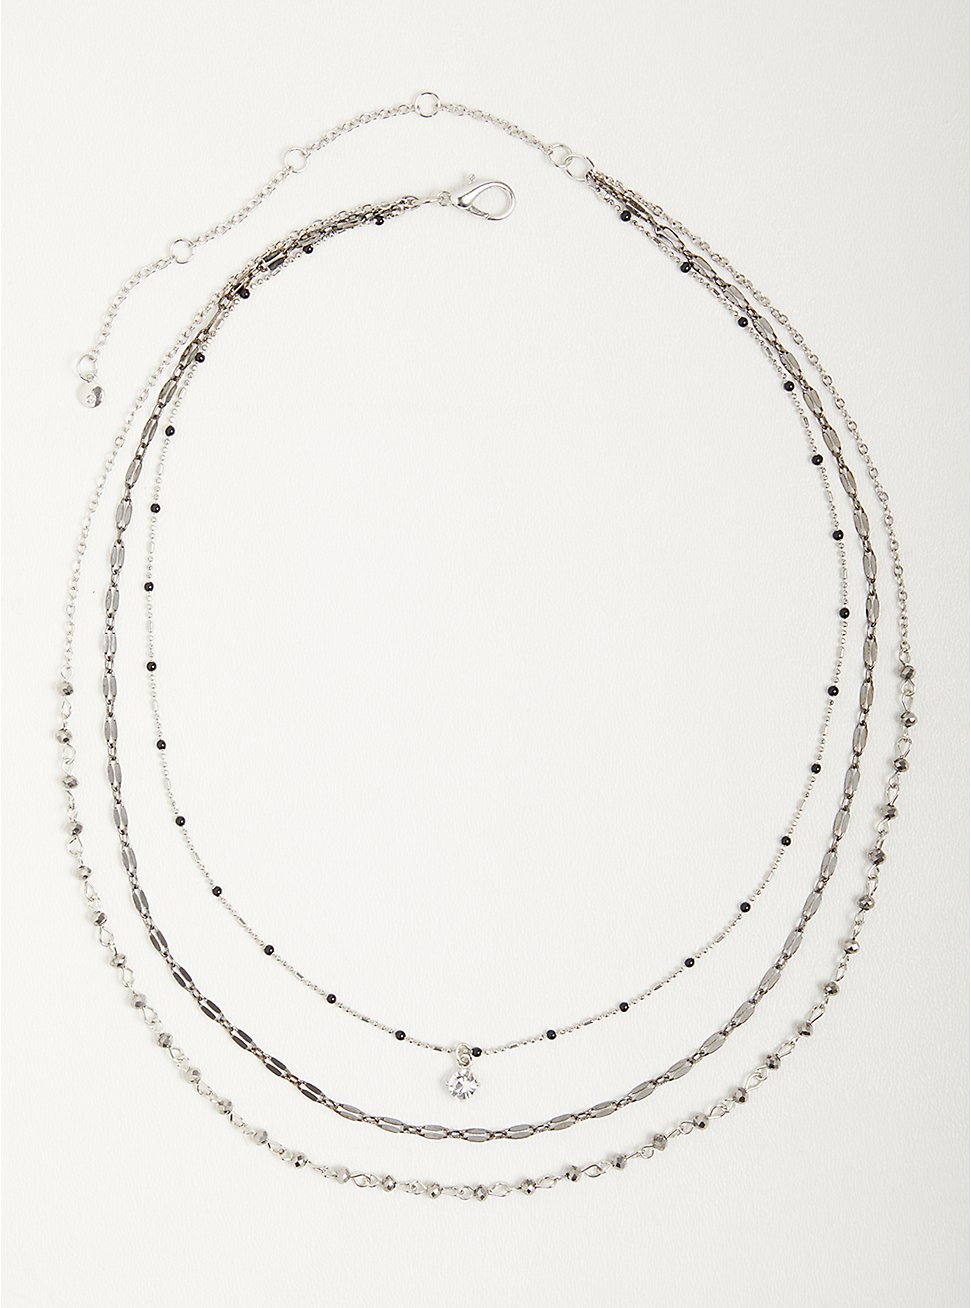 Layered Necklace - Silver Tone And Black Sparkle , , hi-res